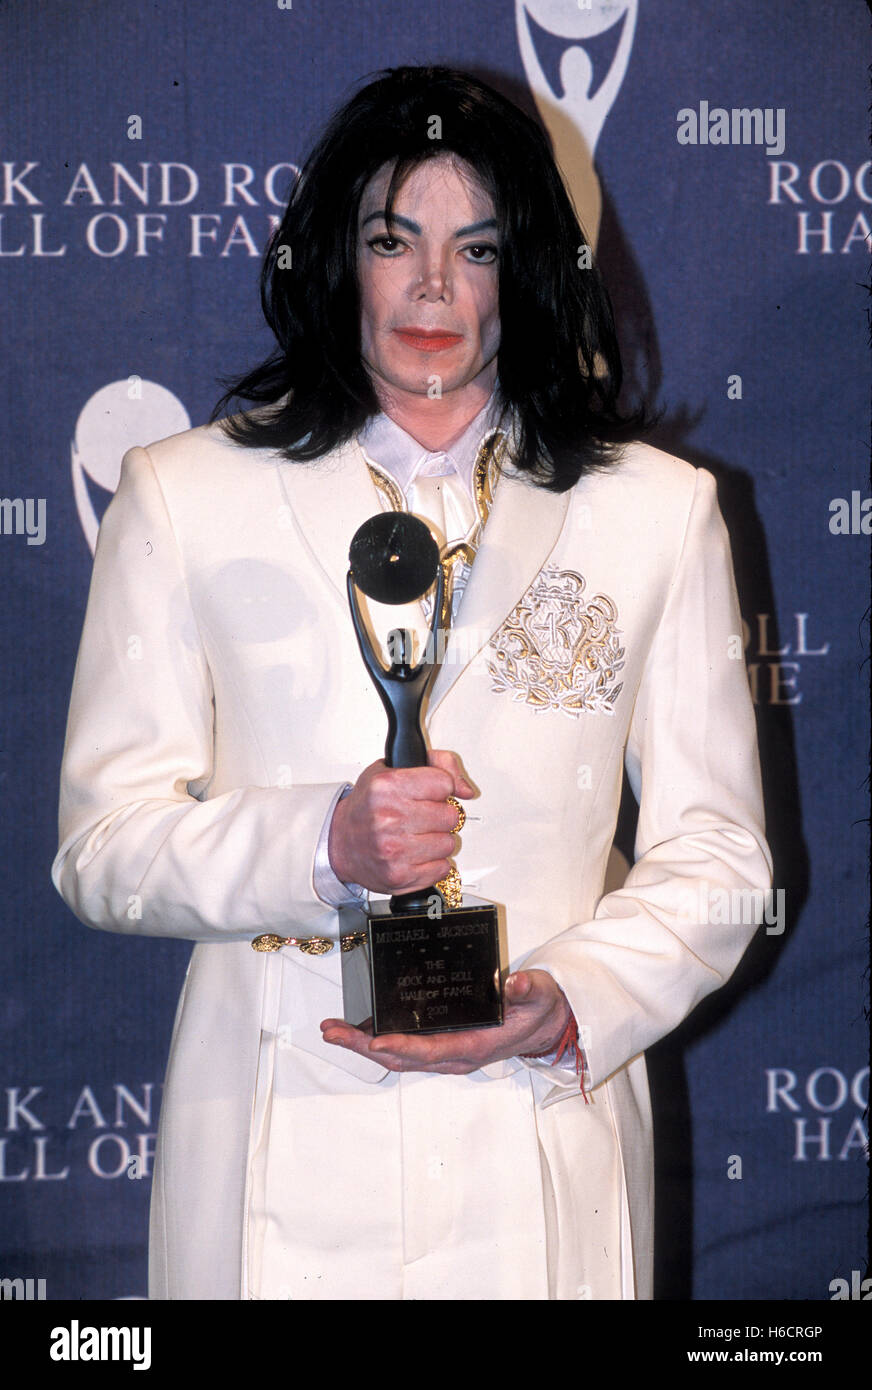 Michael Jackson at the Rock & Roll Hall of Fame Induction Ceremony in New York City on March 19, 2001. © David Atlas / MediaPunch Stock Photo